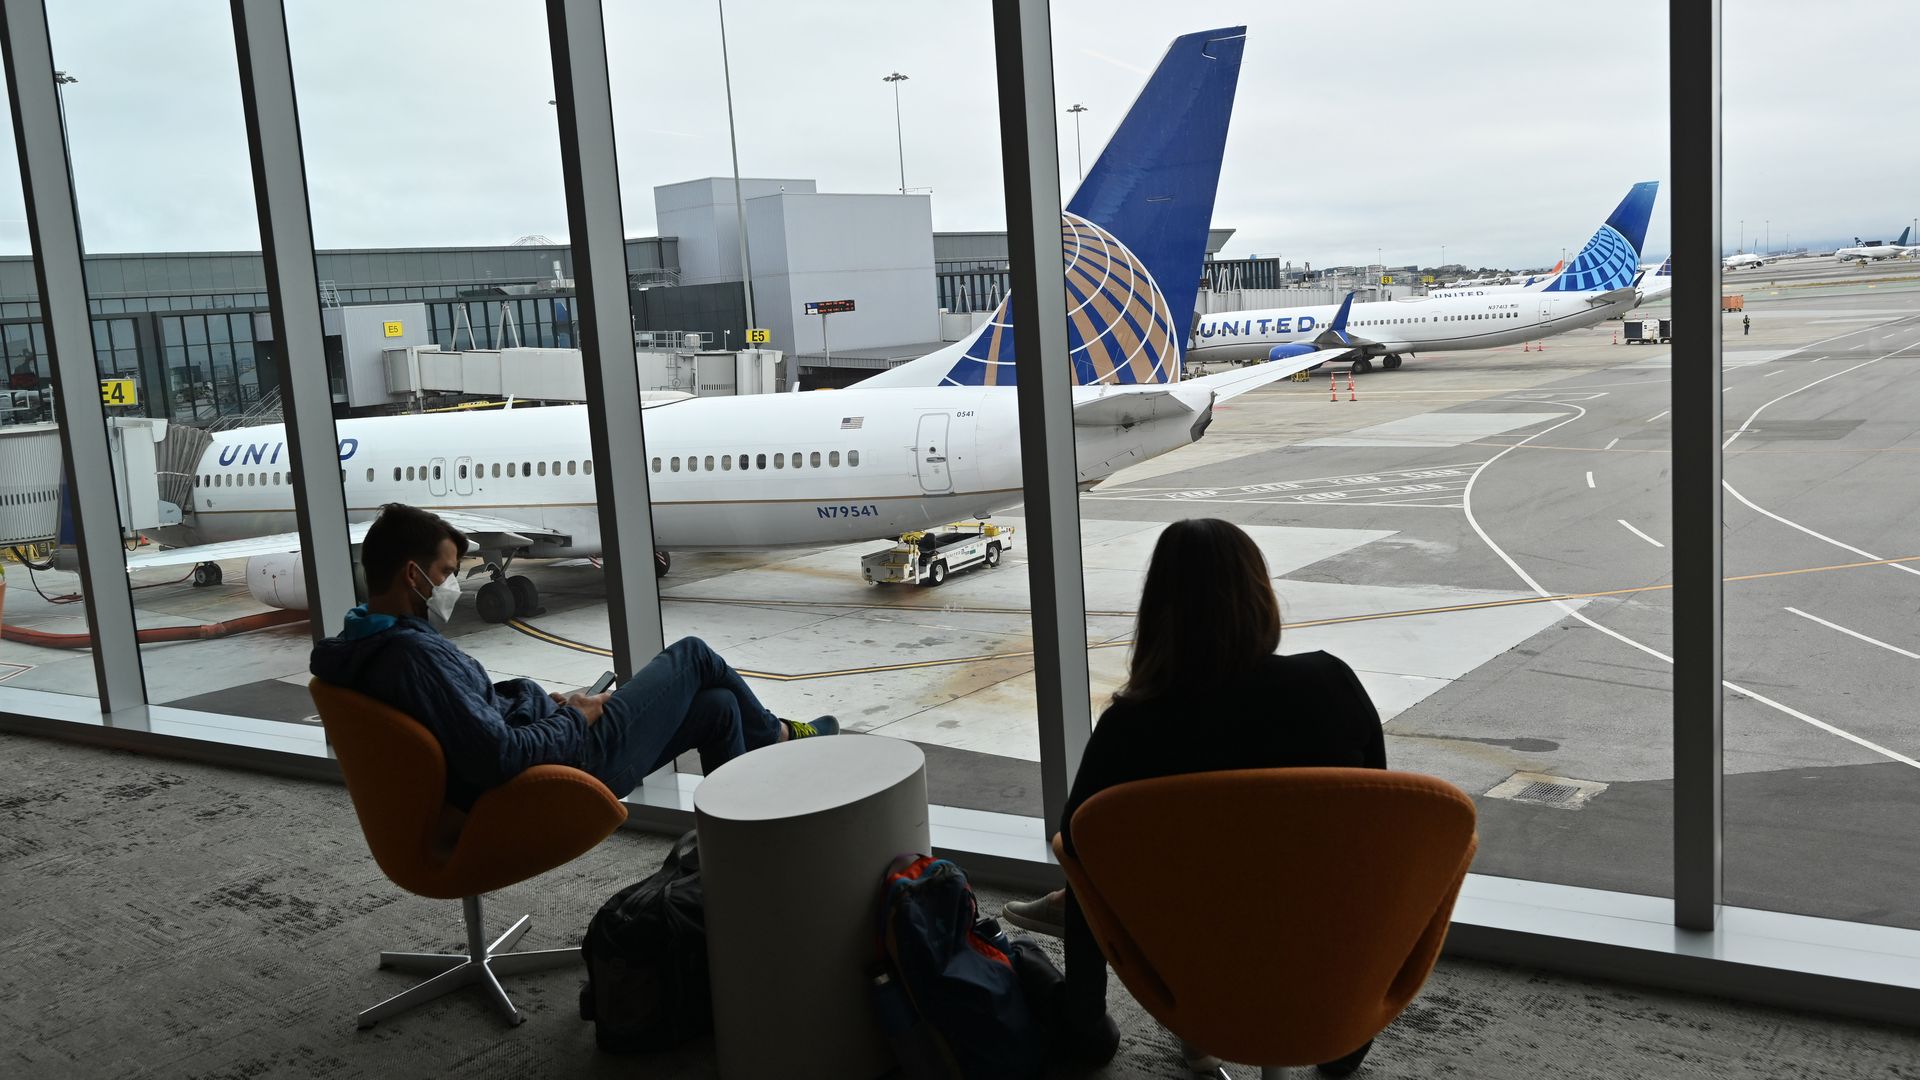 Two people sit inside the airport with plans in the background.